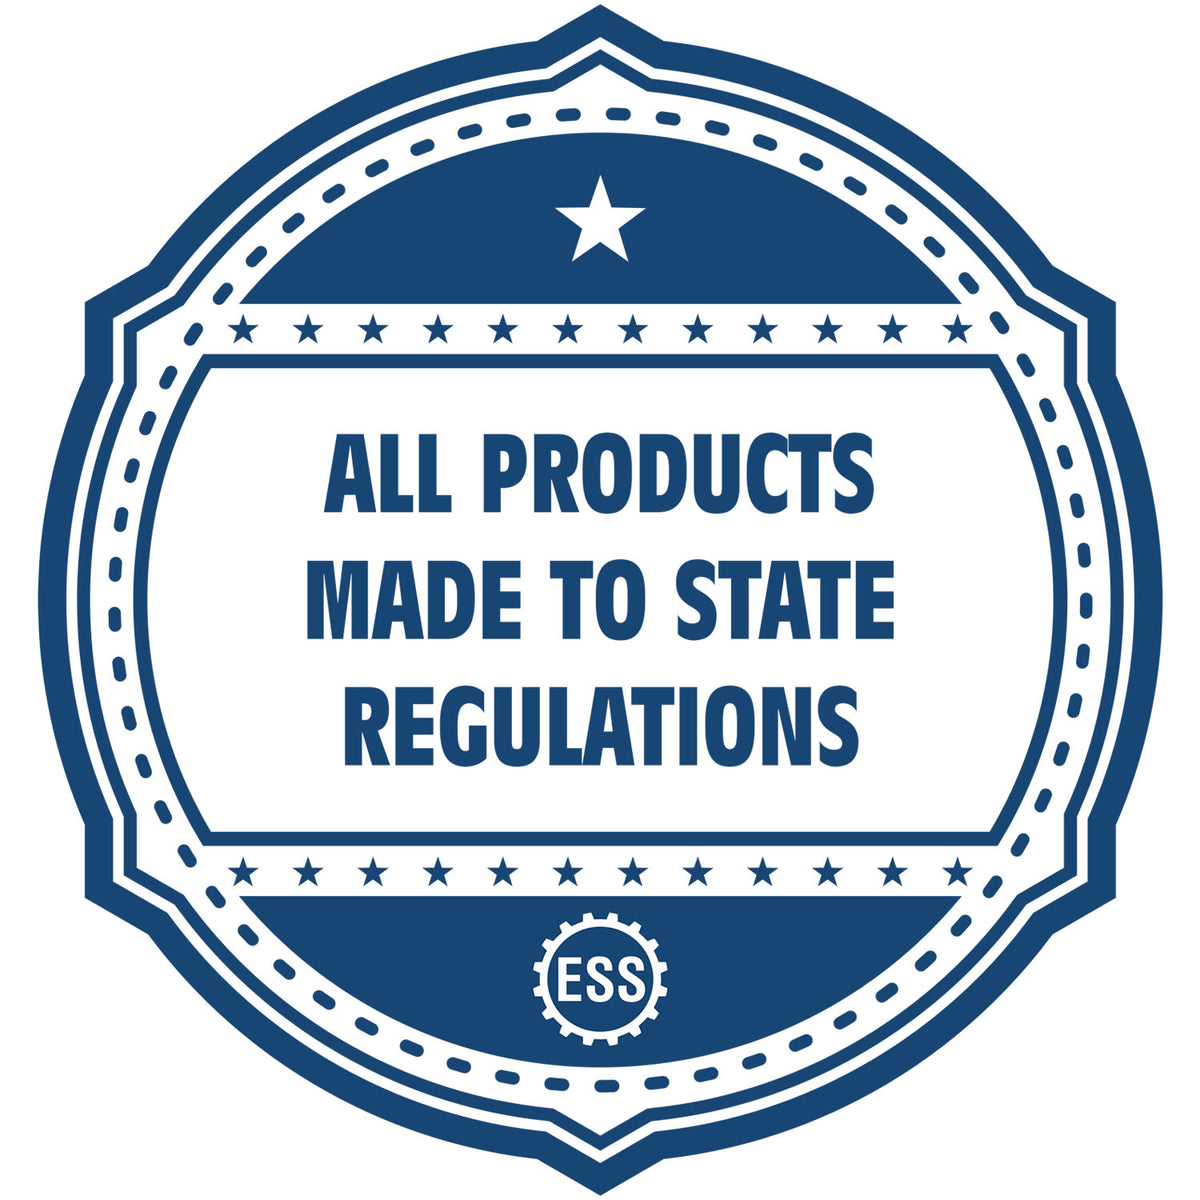 A blue icon or badge for the Slim Pre-Inked Texas Professional Geologist Seal Stamp showing that this product is made in compliance with state regulations.